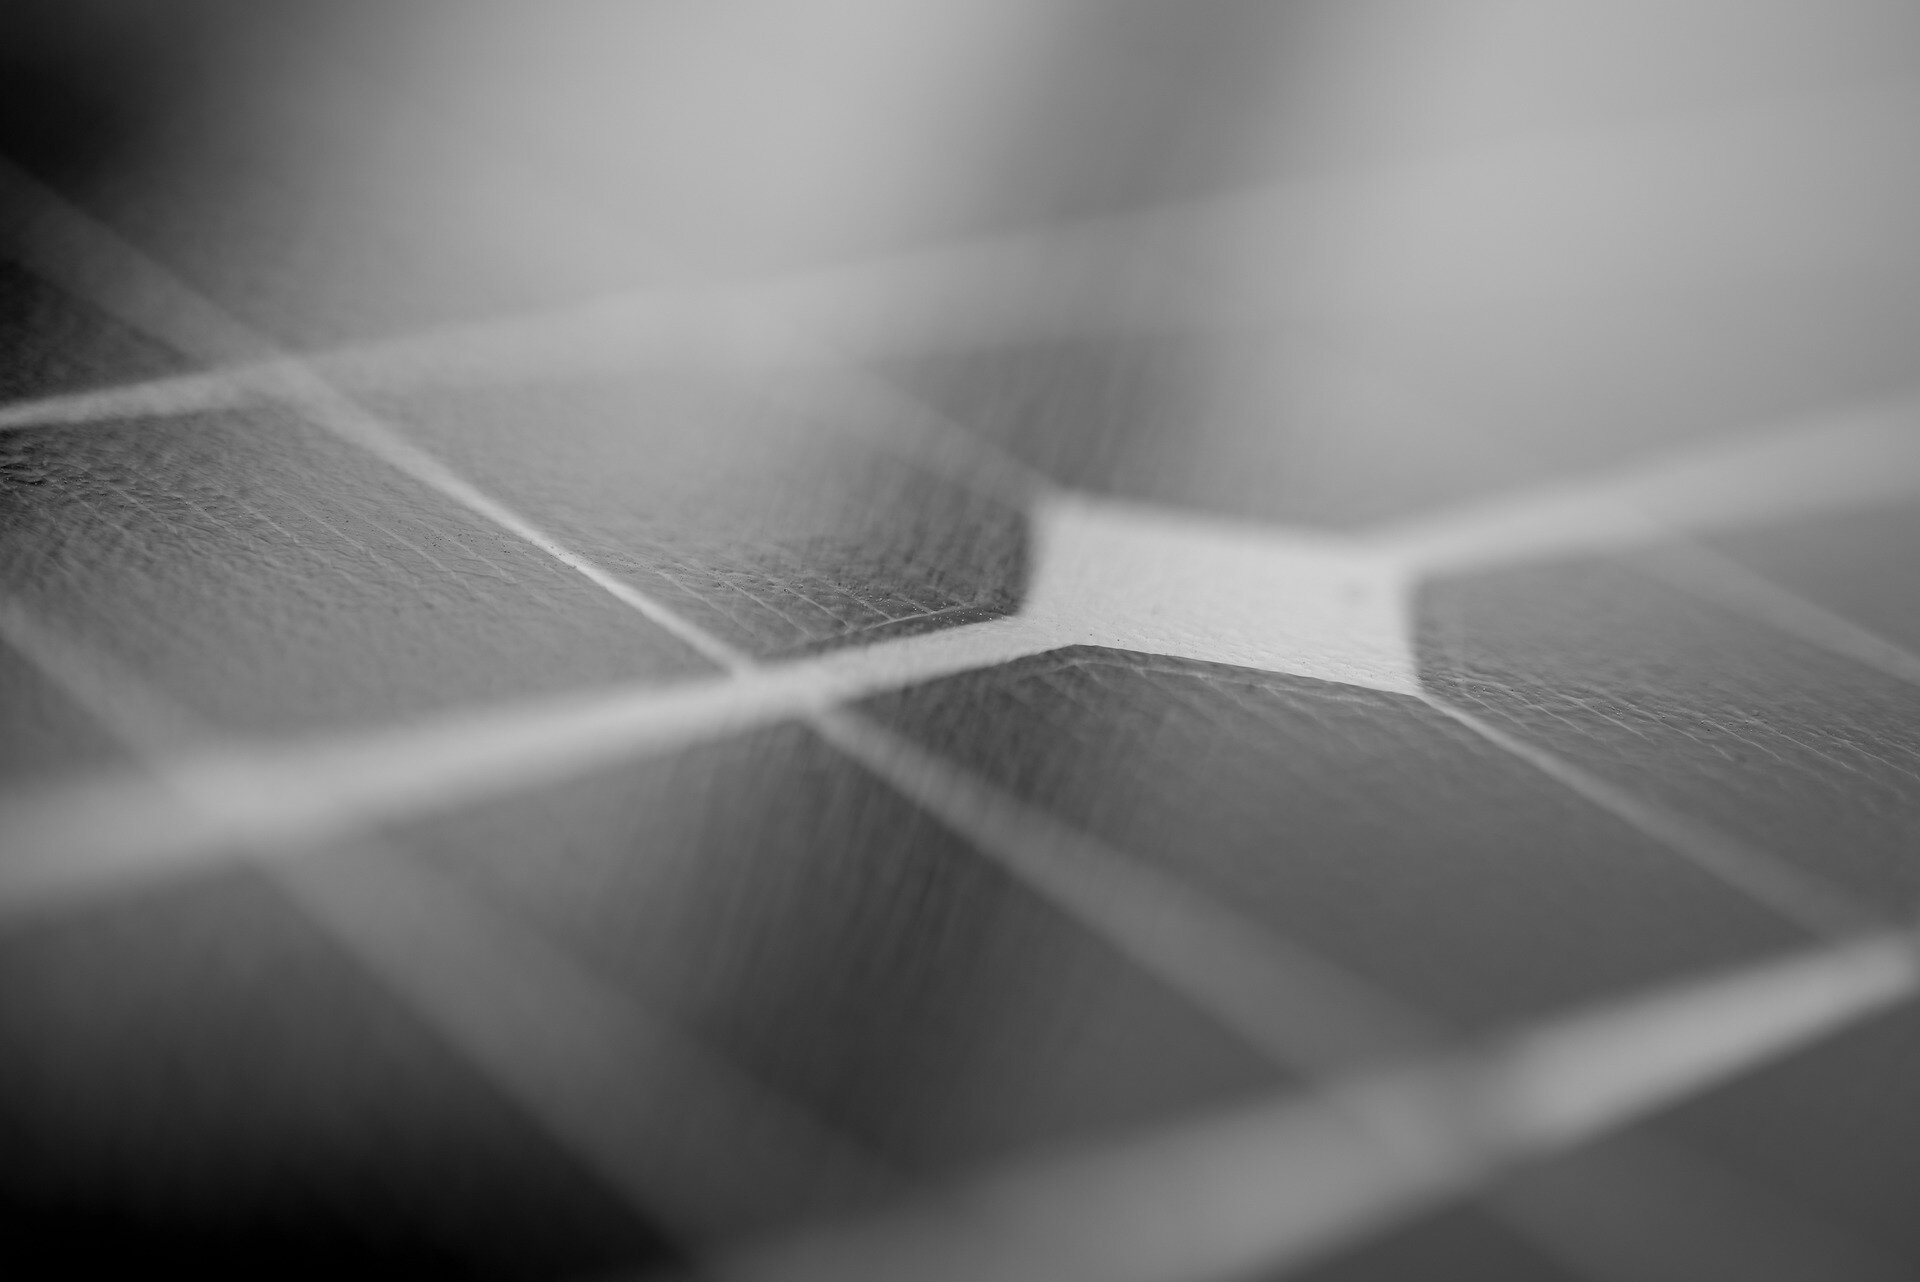 Corralling ions improves viability of next generation solar cells